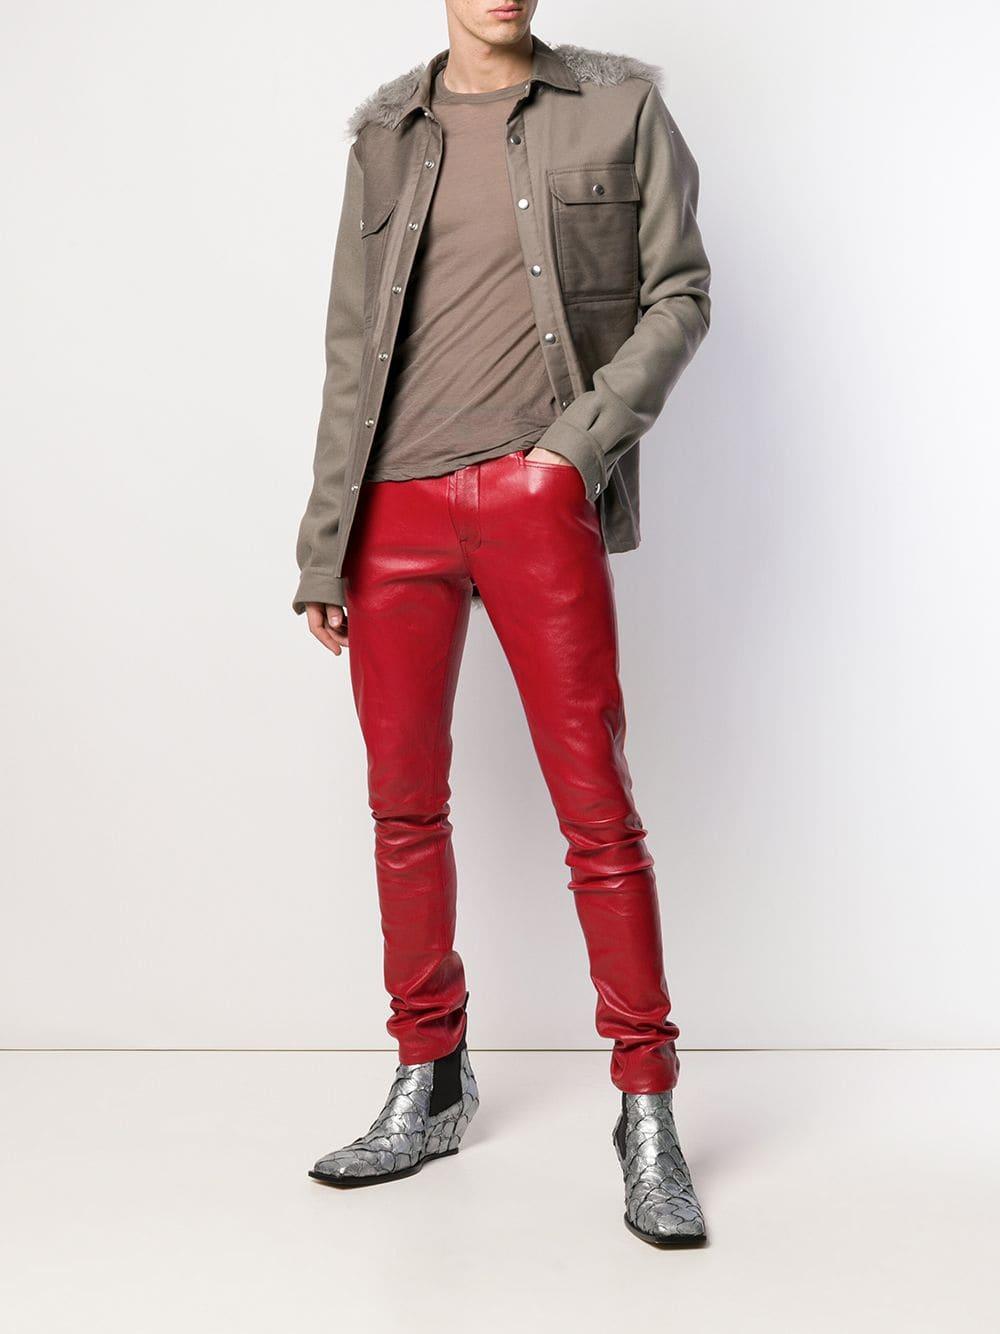 Rick Owens Leather Skinny Pants in Red for Men - Lyst